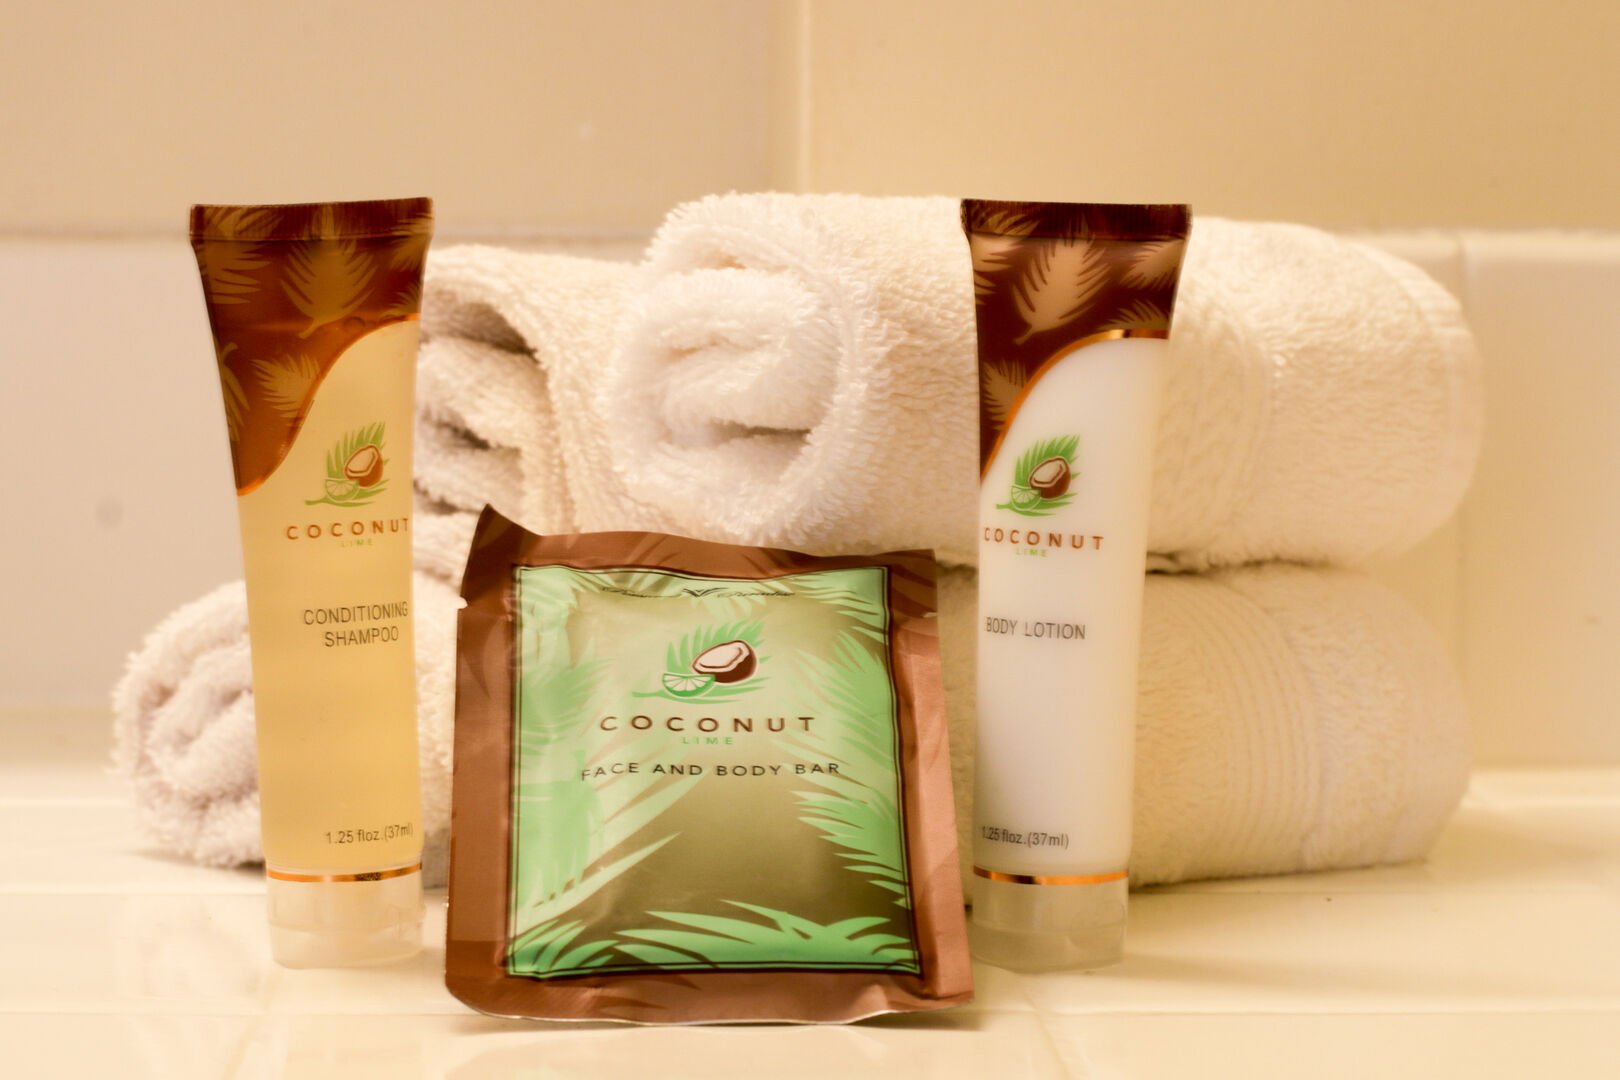 We provide starter kit toiletries and towels